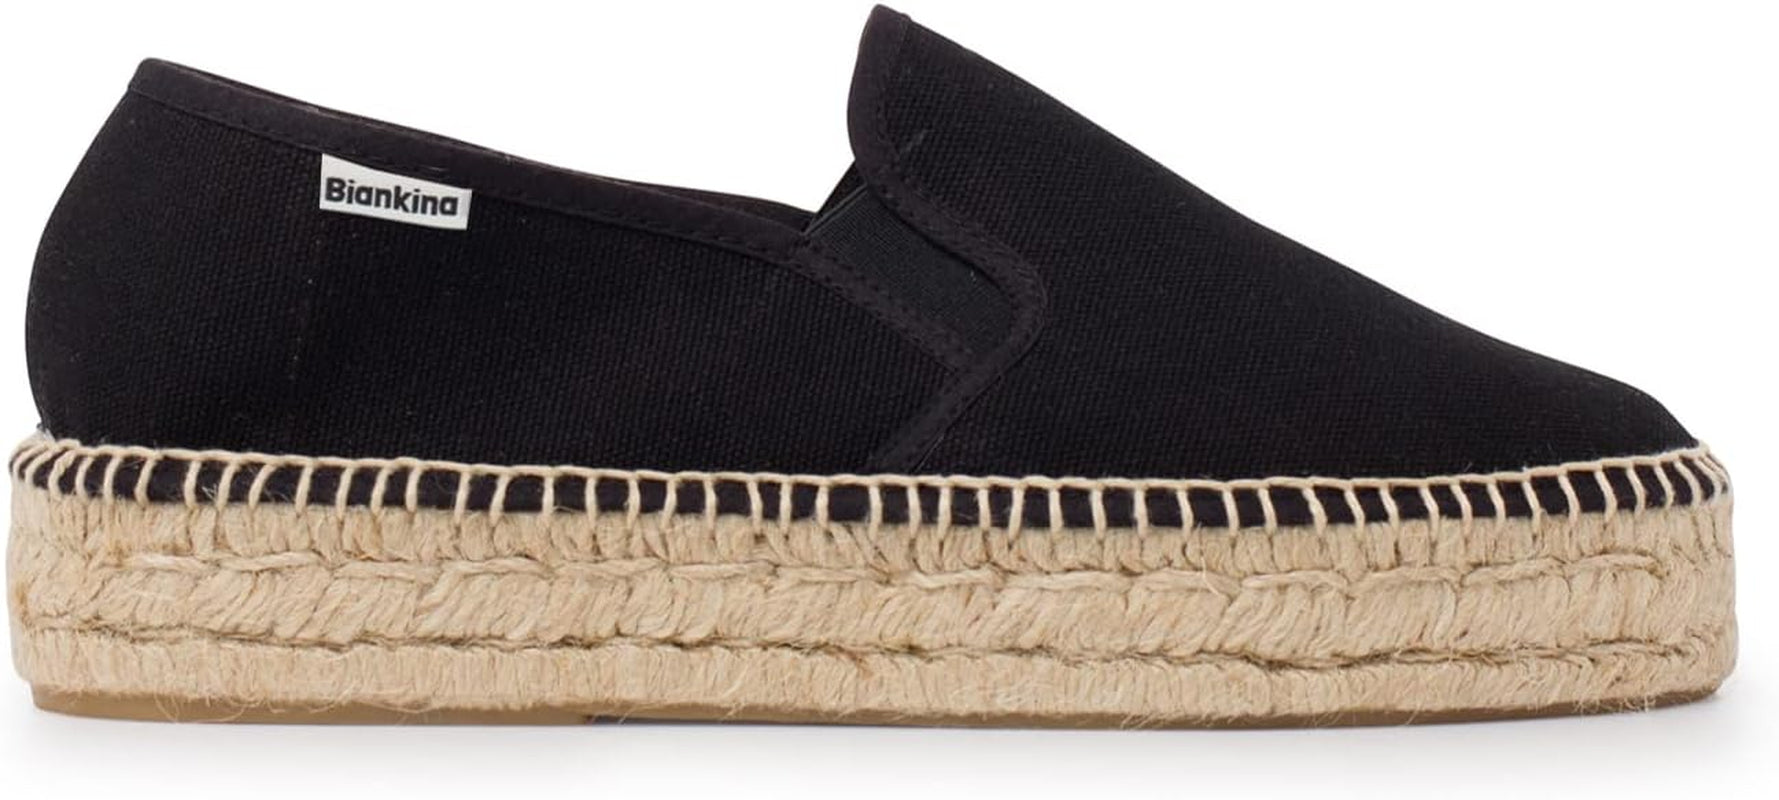 Palma Sustainable Platform Slip on Espadrilles for Women - Classic Style Breathable Eco Canvas Upper, Comfy Insole with Jute Midsole, Handmade Shoes, Made in Spain